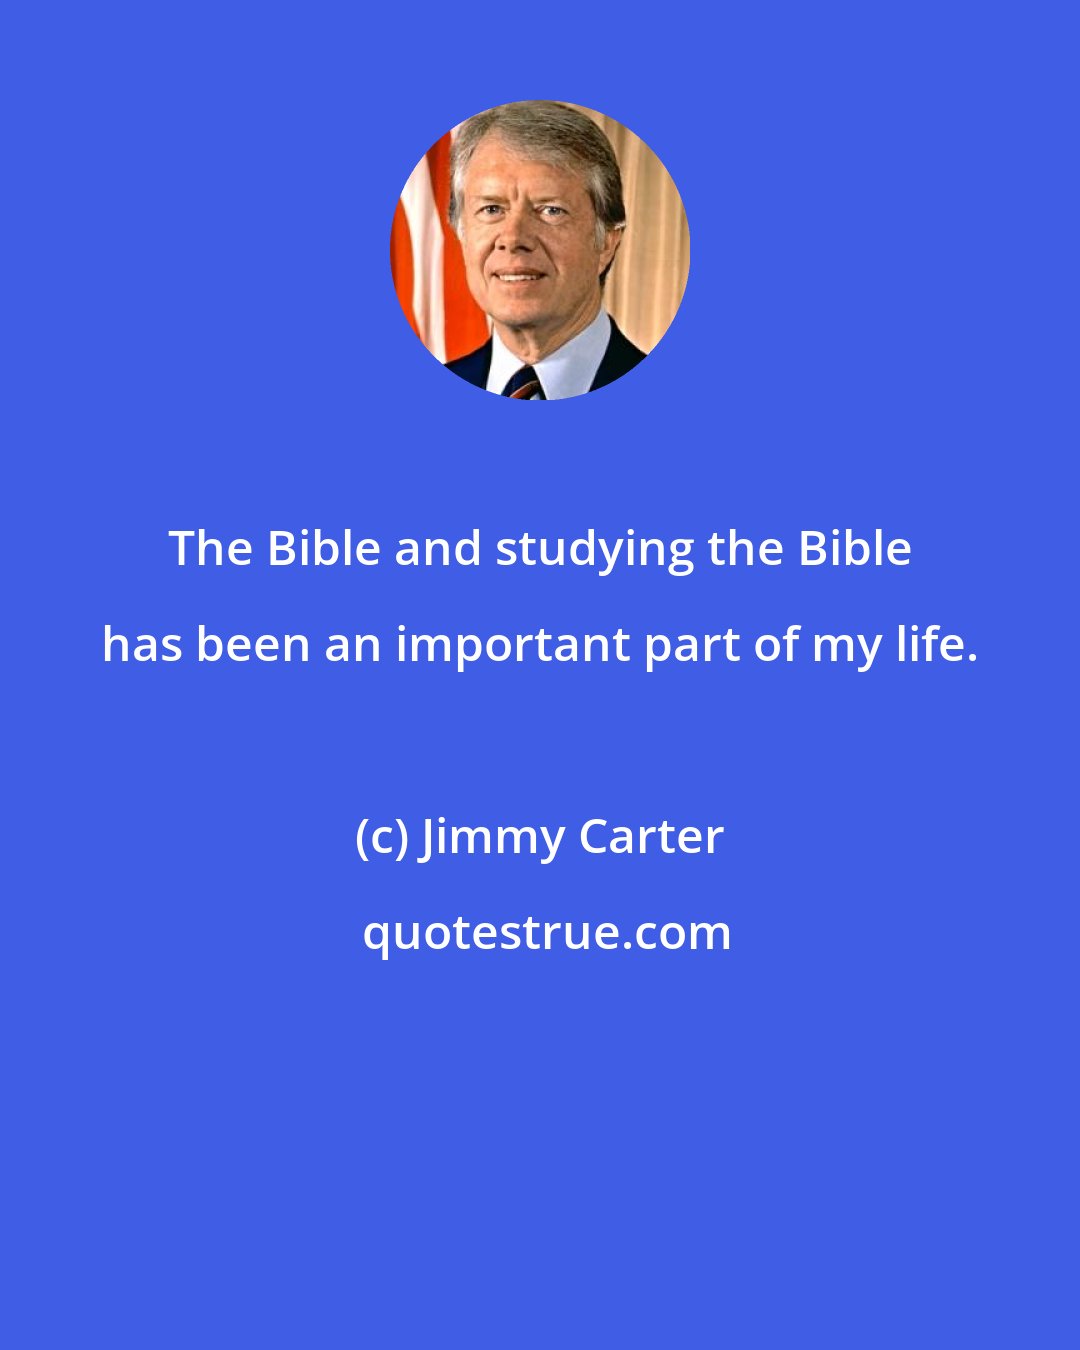 Jimmy Carter: The Bible and studying the Bible has been an important part of my life.